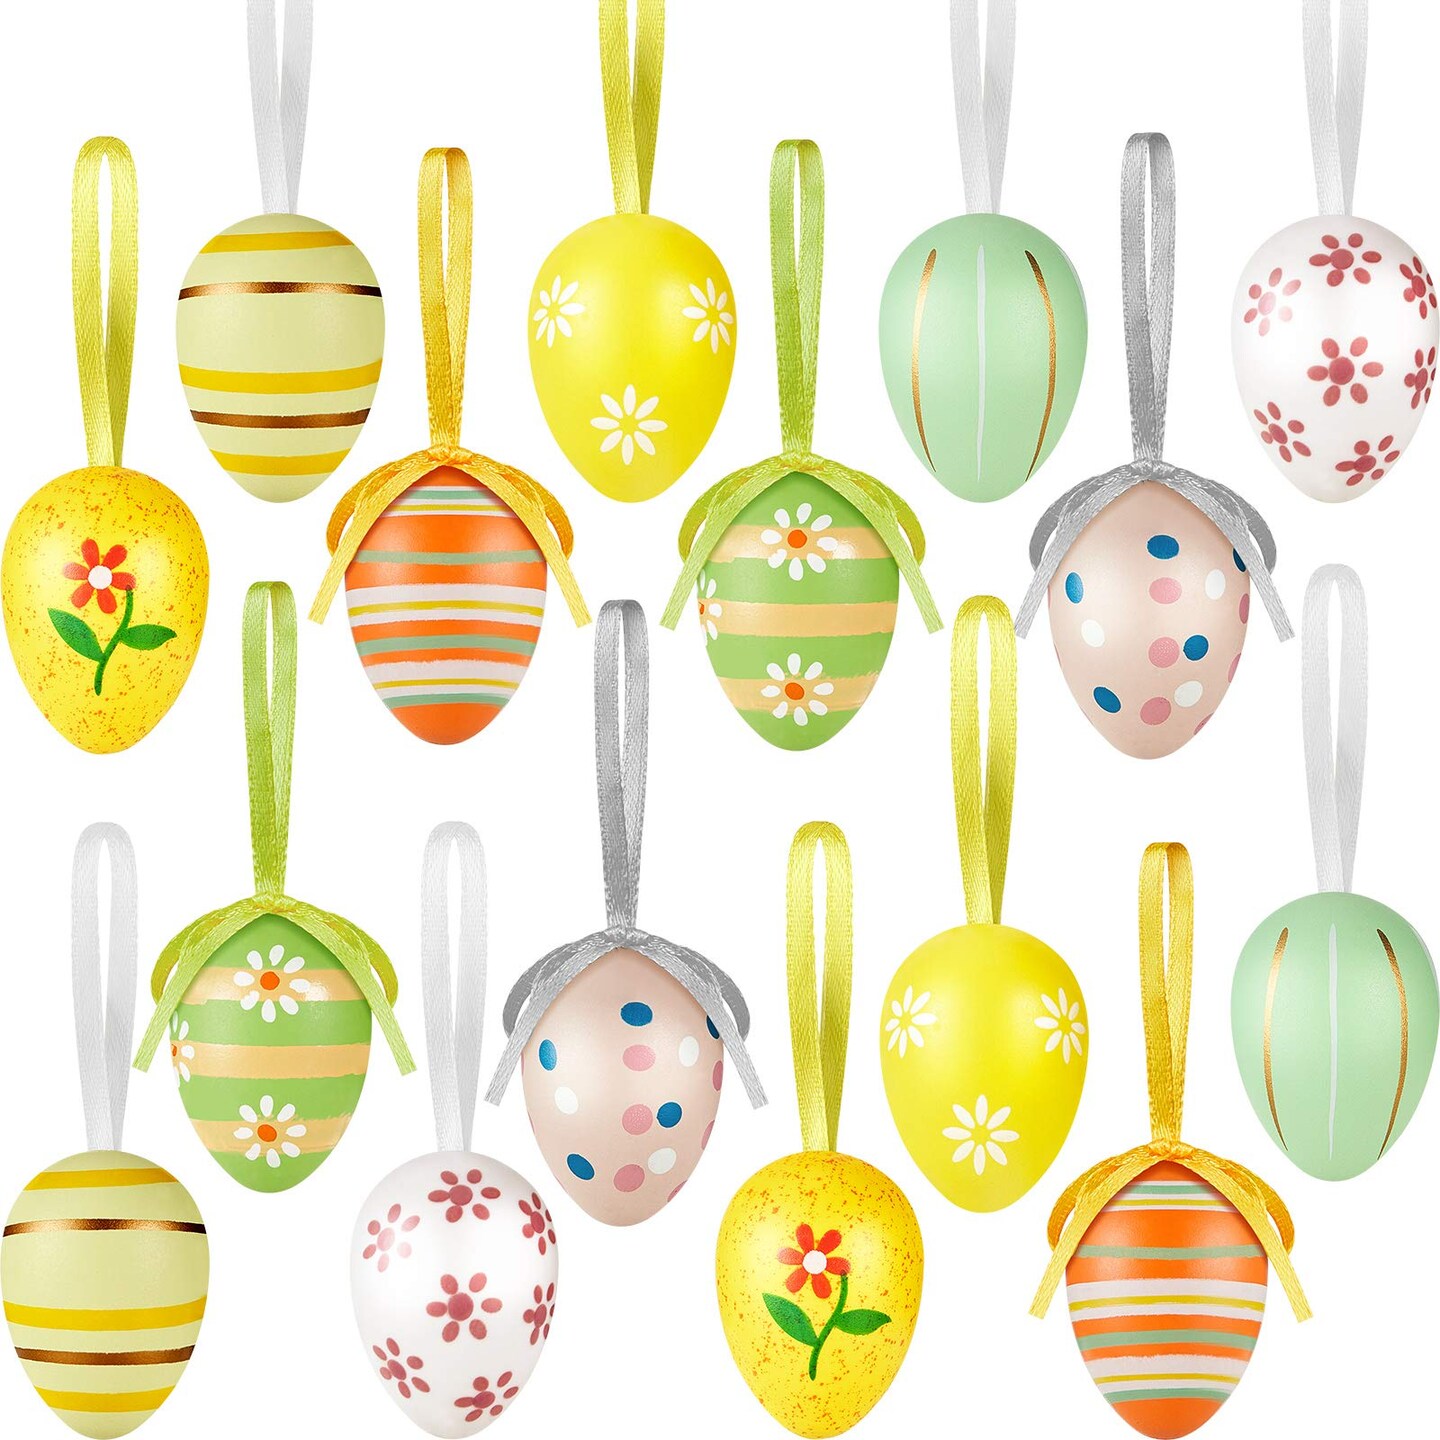 24 Pieces Easter Hanging Eggs Multicolored Plastic Easter Egg Hanging Ornaments Easter Decorations for Tree with Ropes for DIY Crafts Party Favor Home Decor (1.57 x 1.18 Inch)